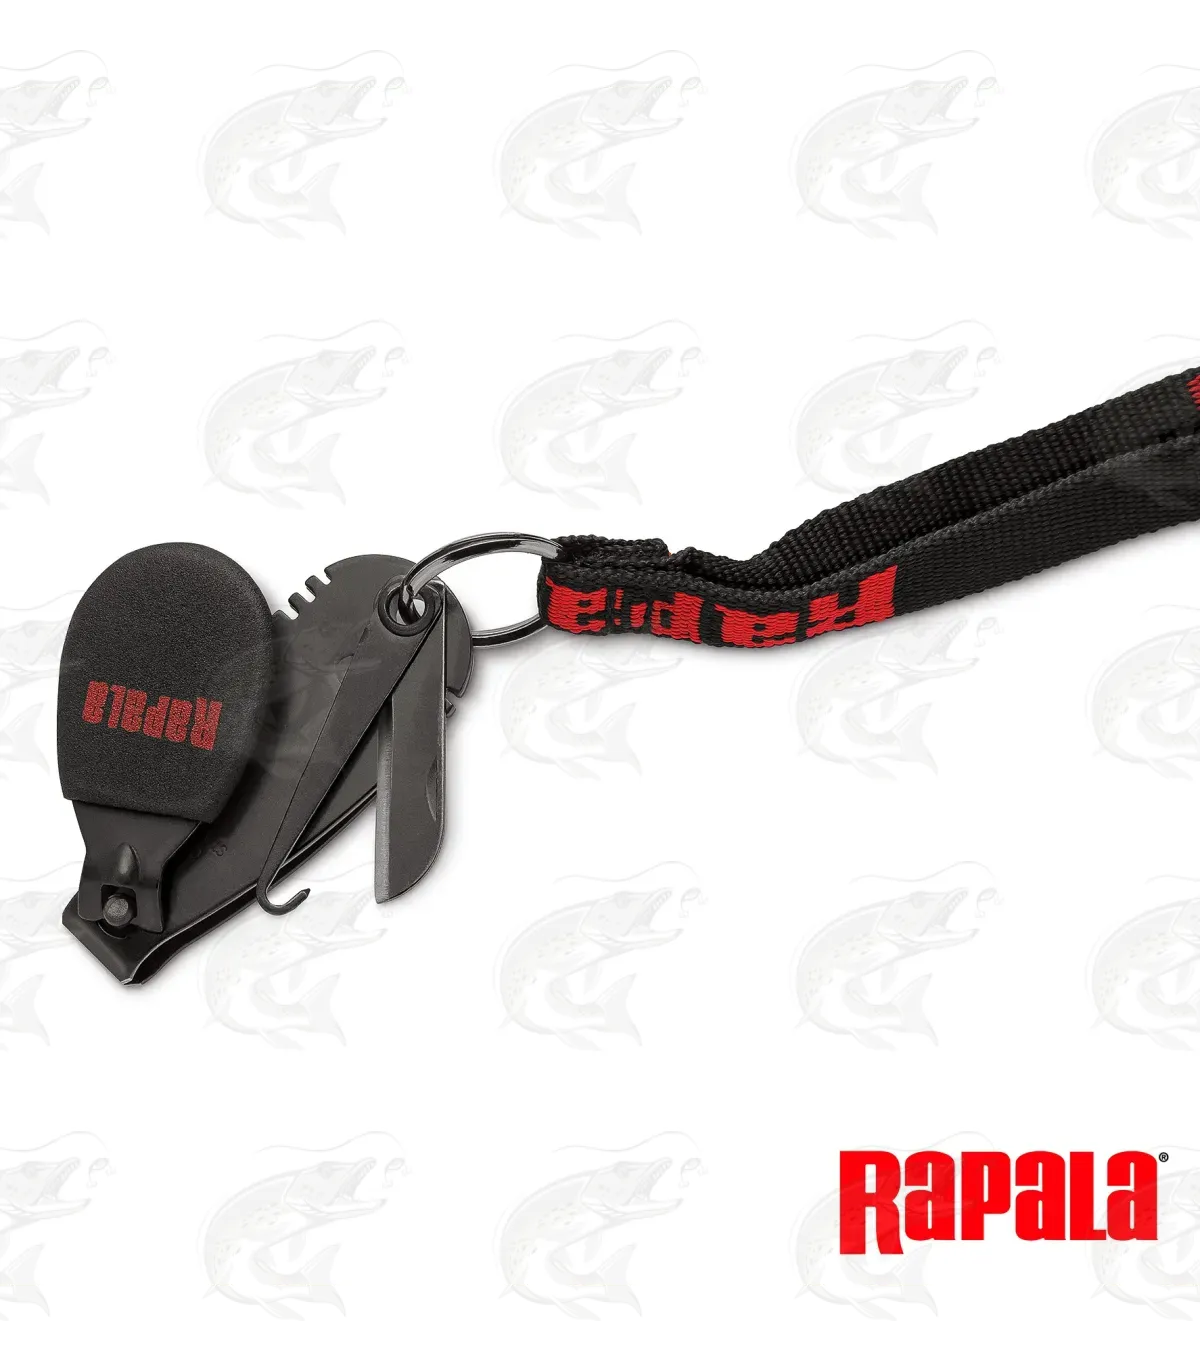 Rapala Fishing Line Pince Clippers - 3 in 1 Fishing Tool